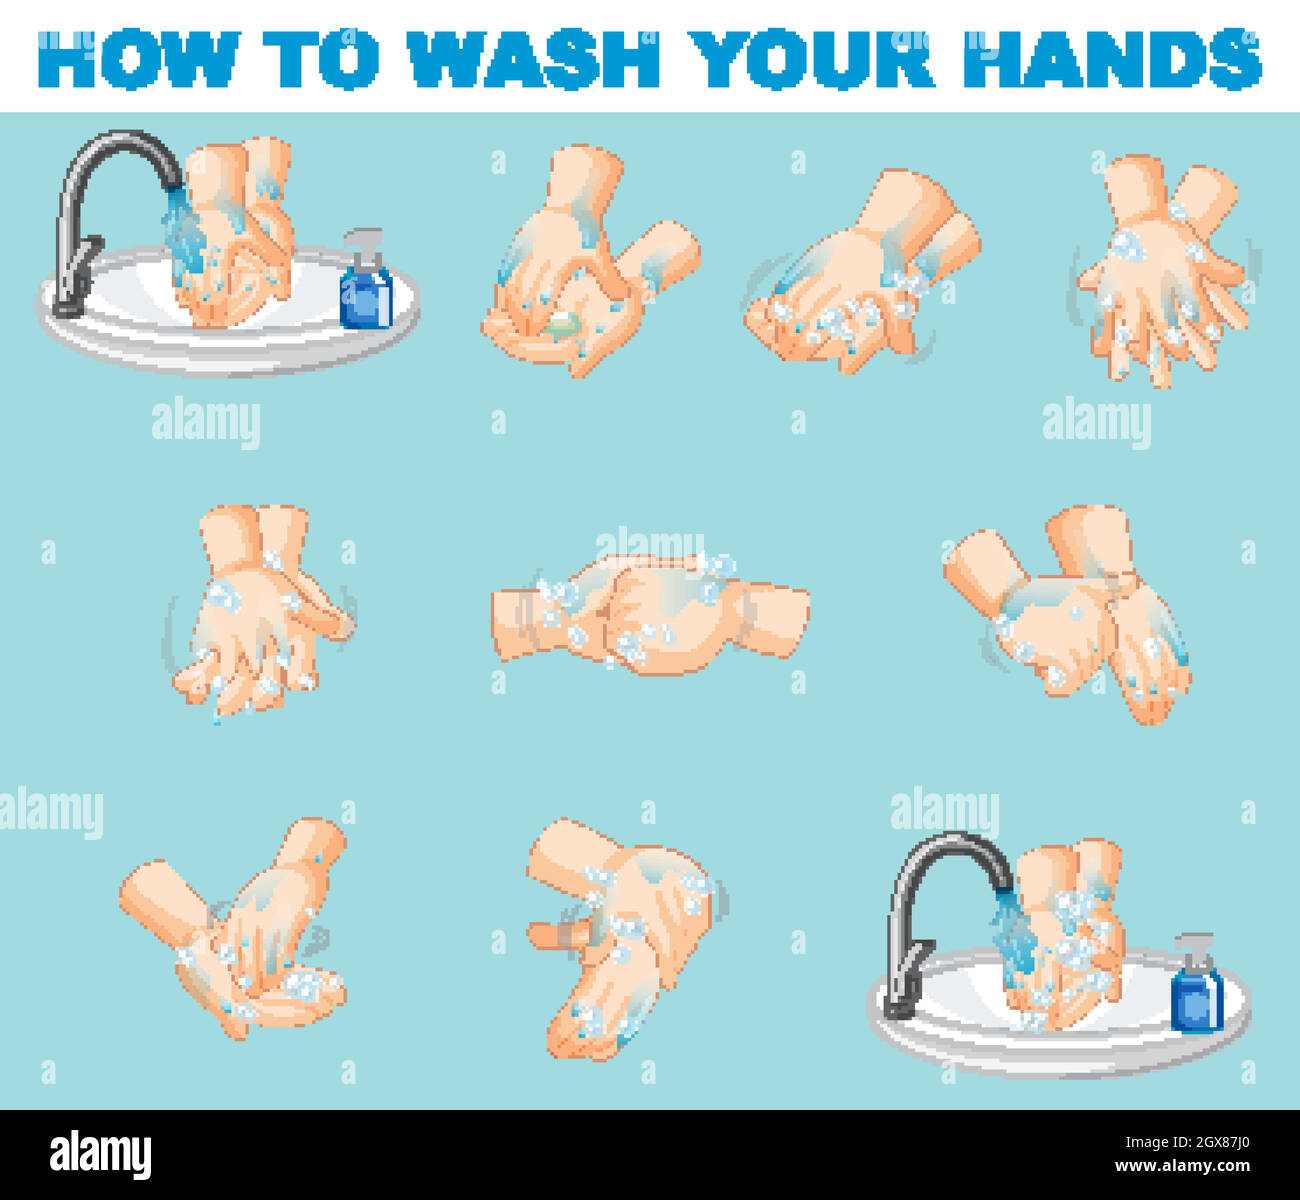 Poster design for how to wash your hands step by step Stock Vector